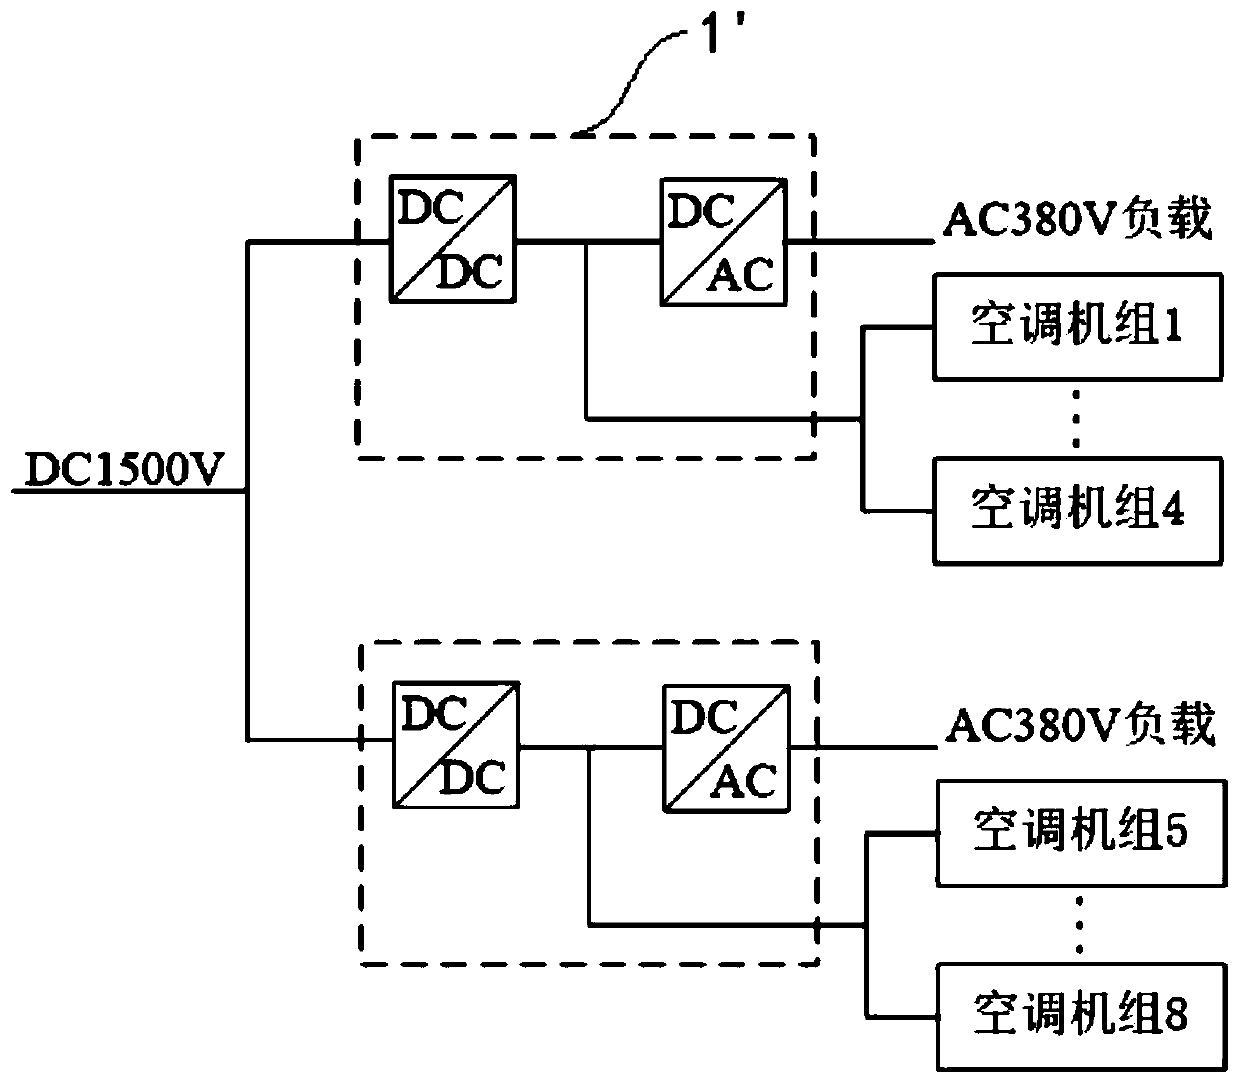 Urban rail vehicle auxiliary power supply system, air conditioning unit and urban rail vehicle